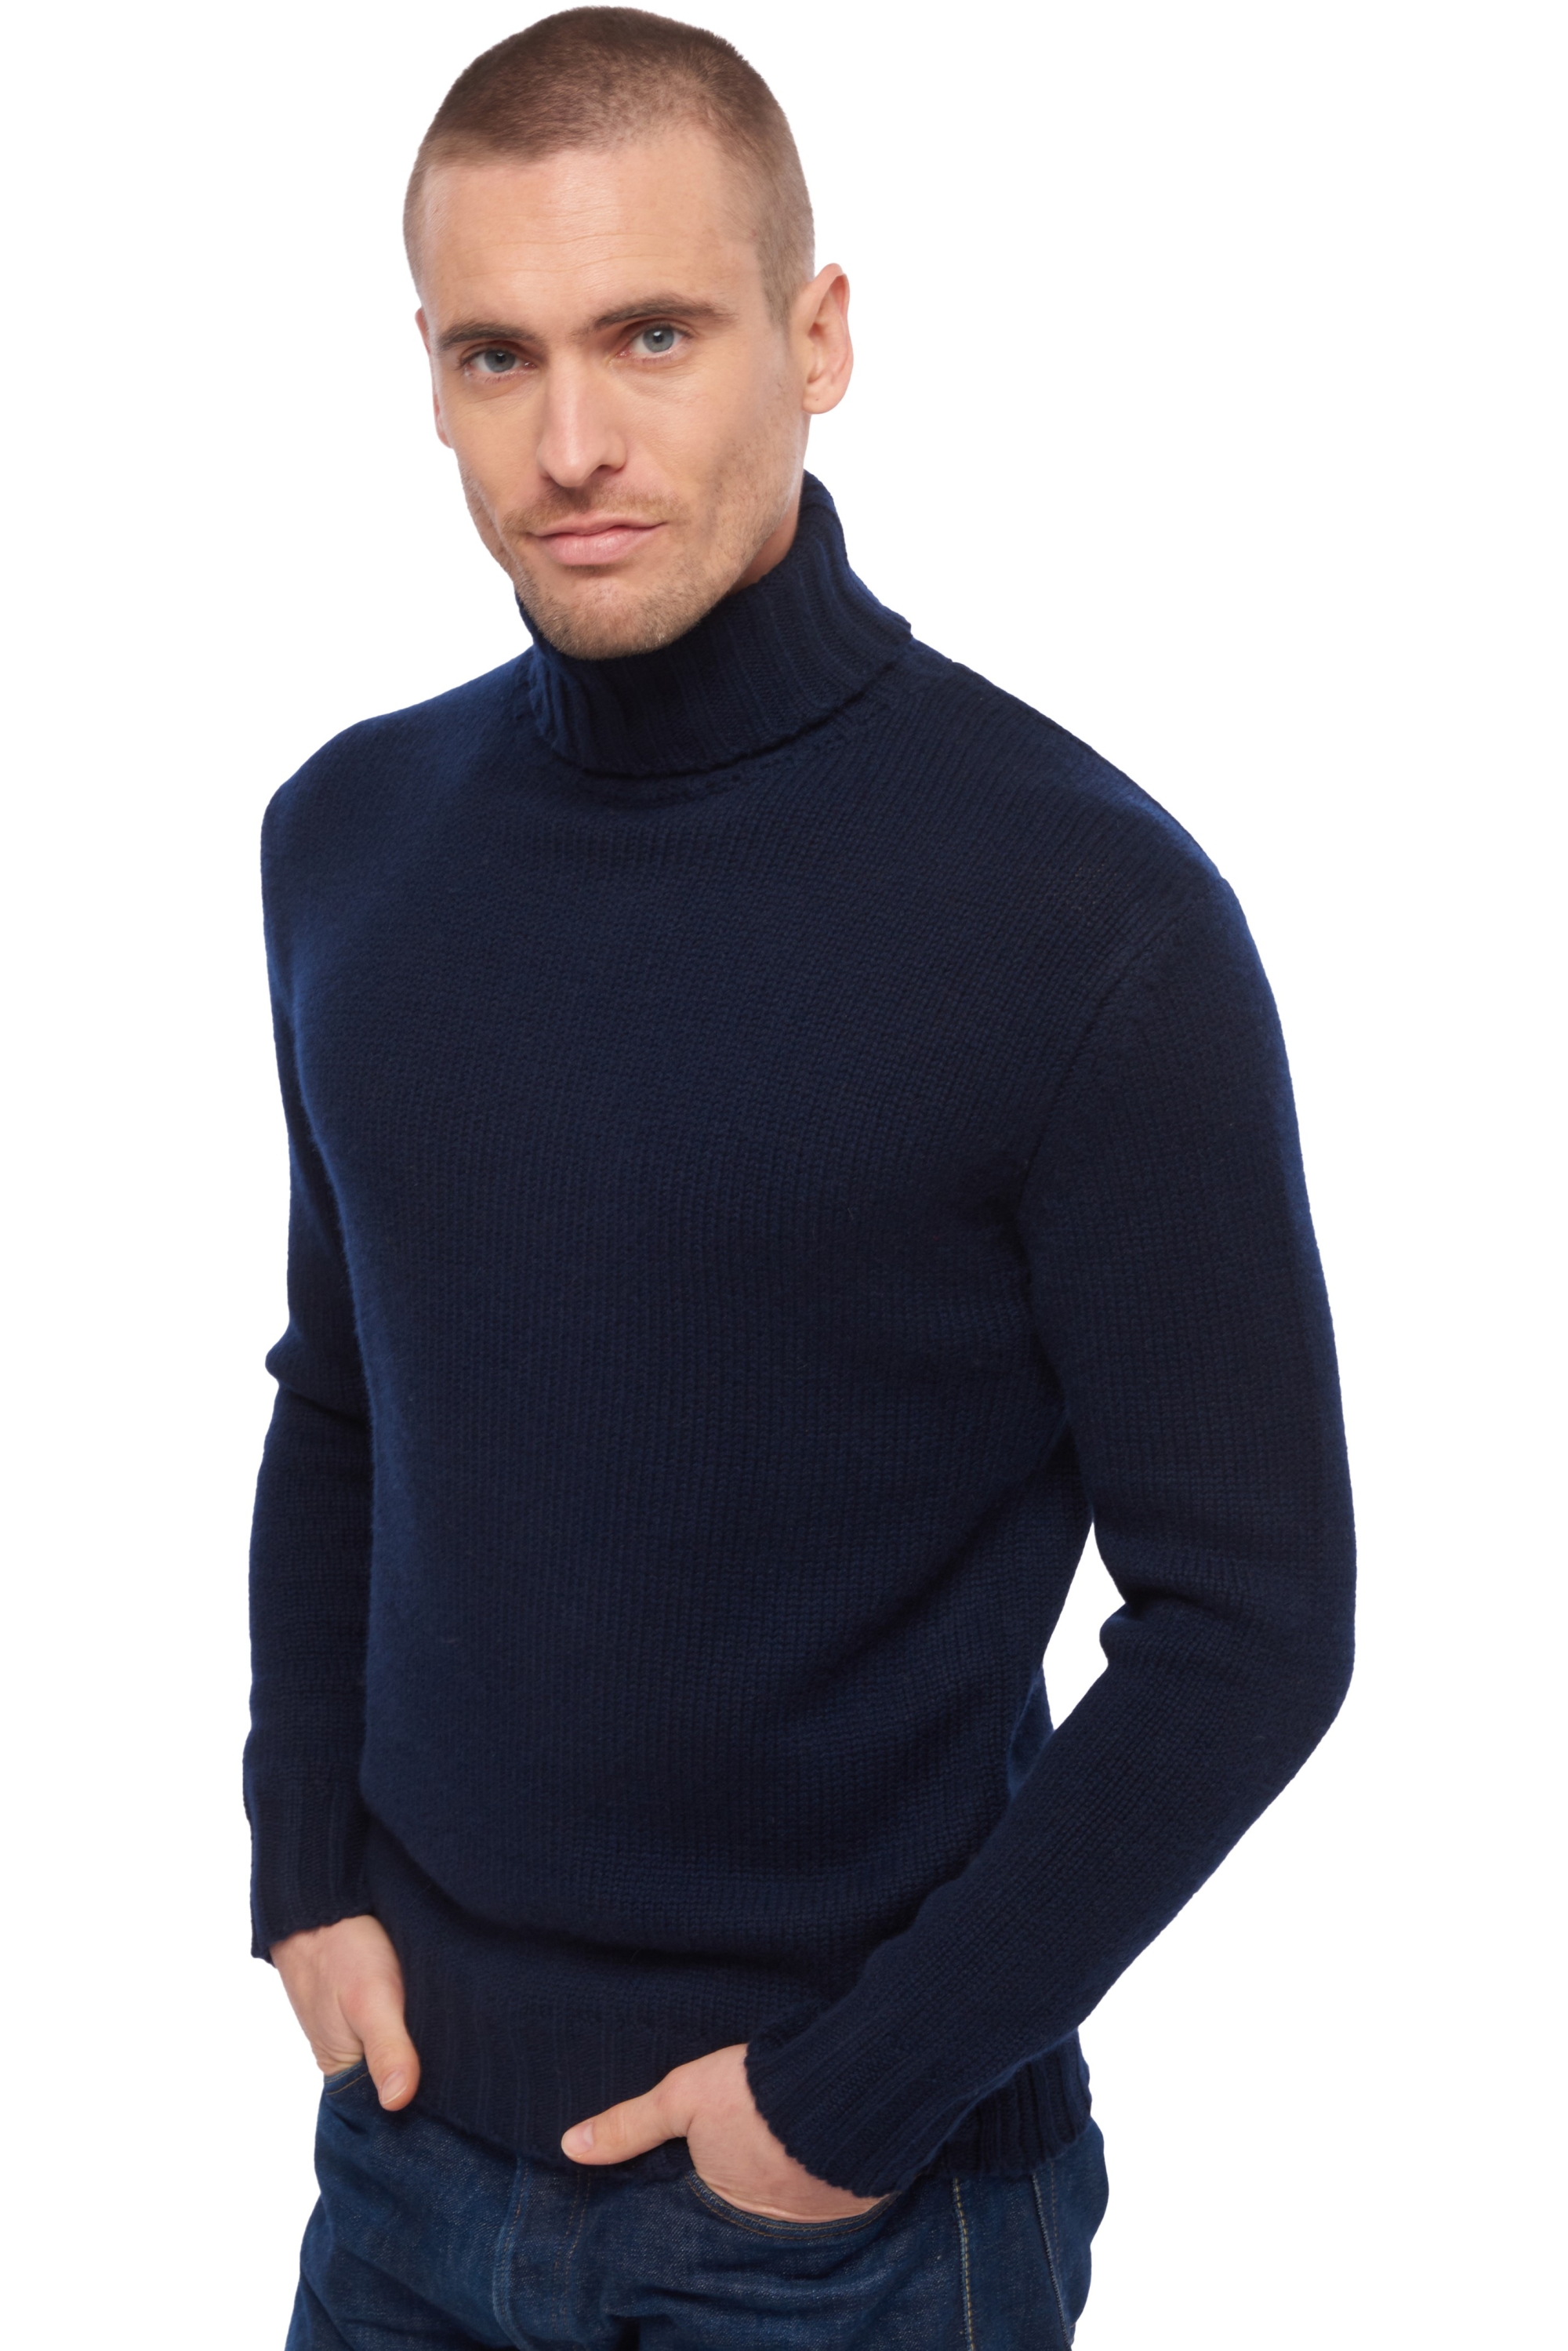 Cachemire pull homme col roule achille marine fonce 3xl